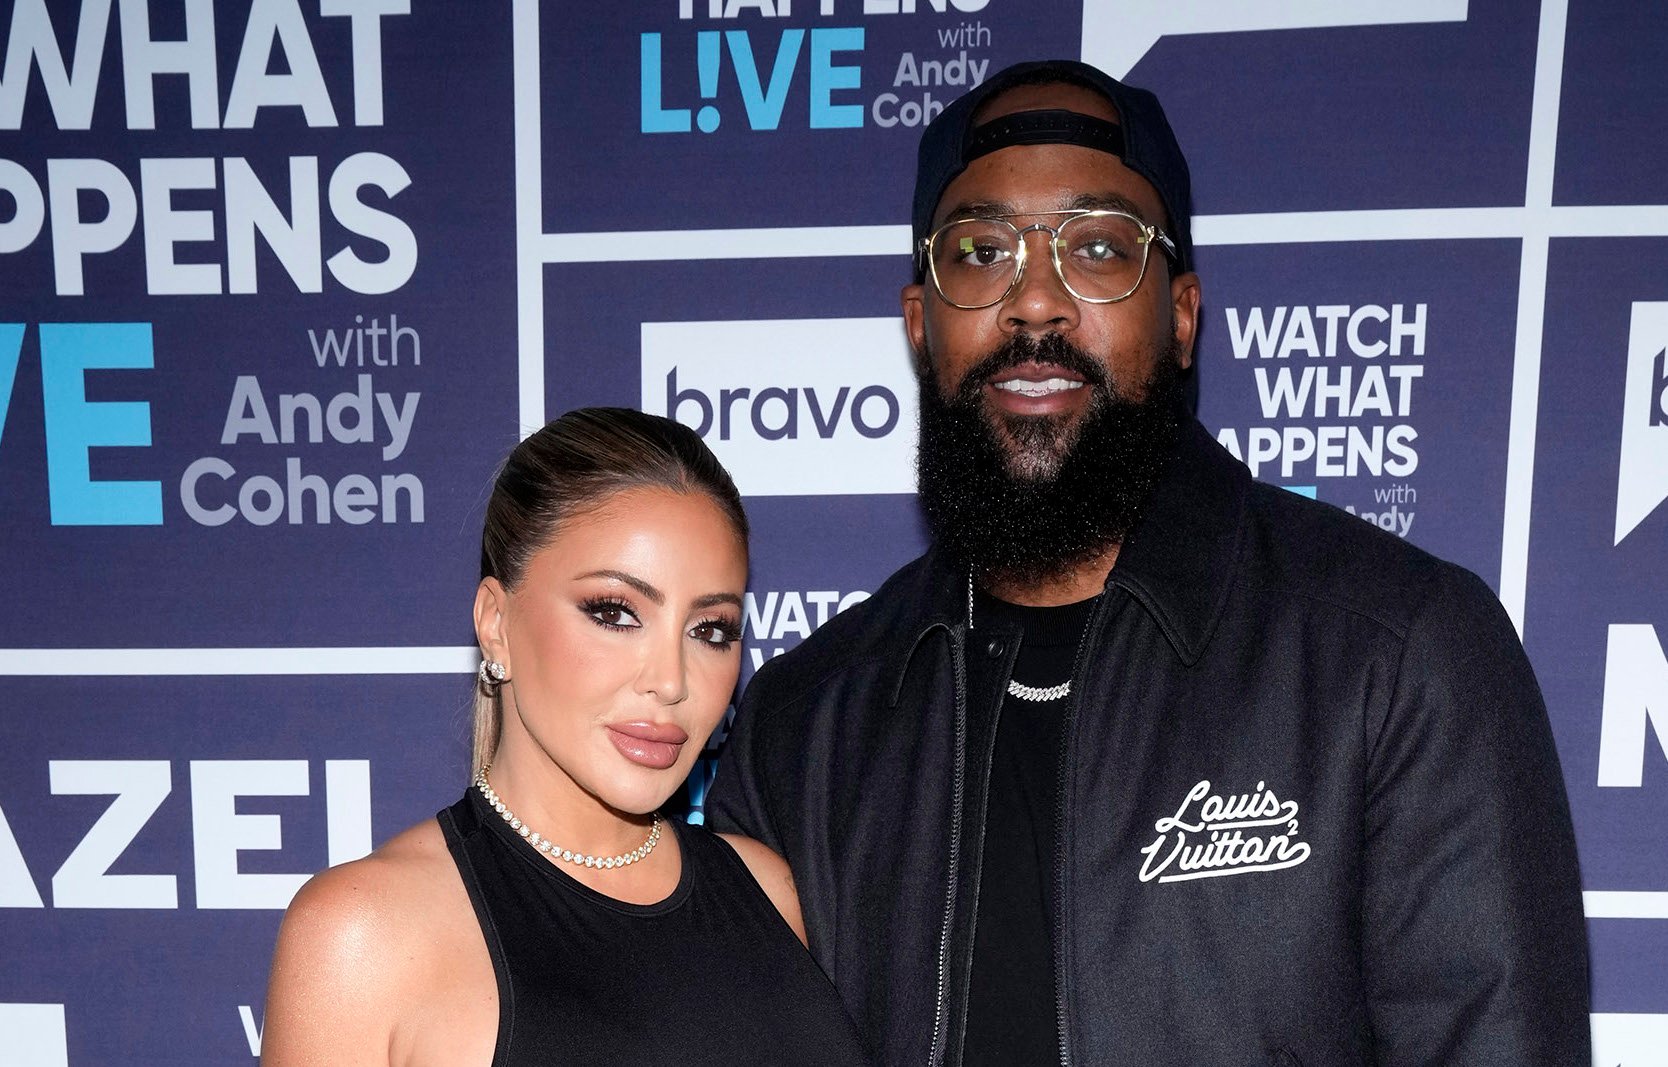 Larsa Pippen and Marcus Jordan posing for a photo together